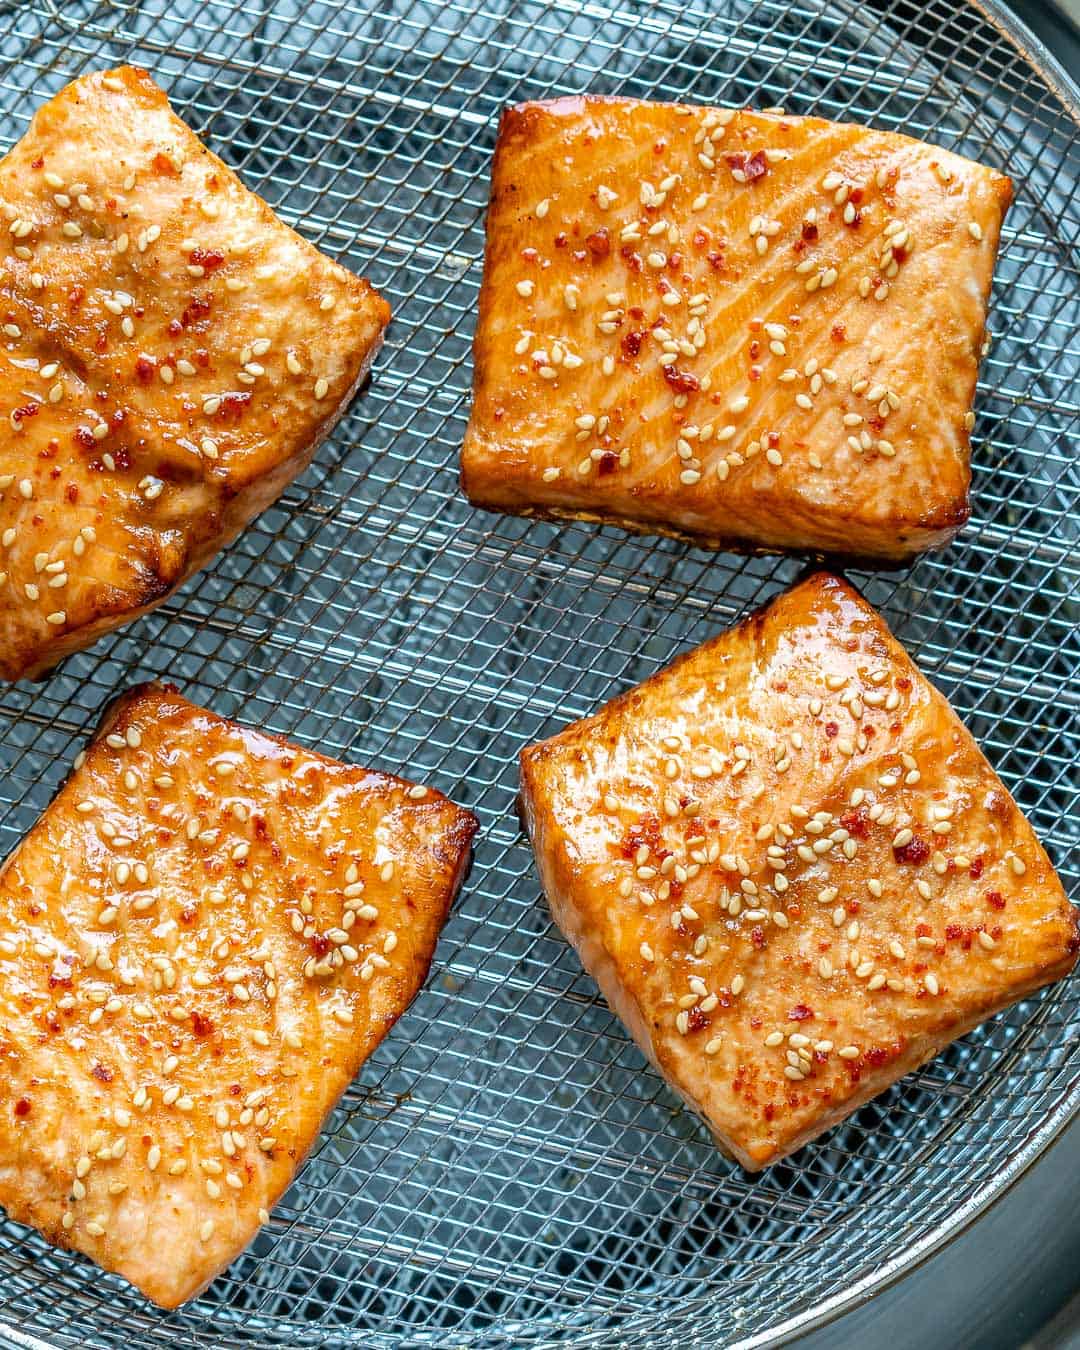 Sprinkle with sesame seeds and chili flakes. 